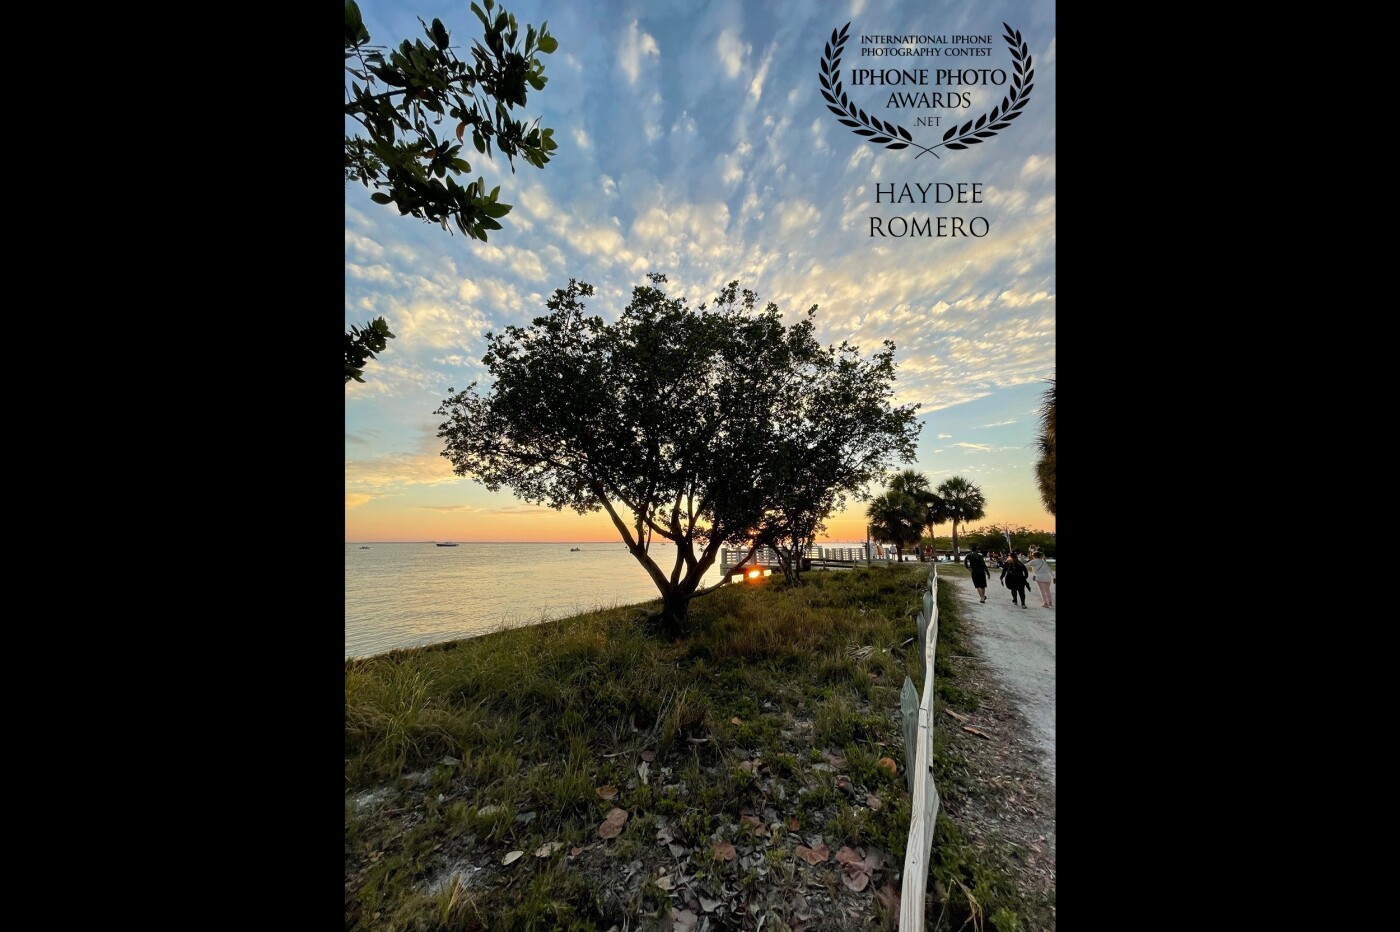 In an evening walk I capture the clouds radiate out in the sky over a tree as the sun sets off  Key Biscayne in the Bill Baggs Cape Florida State Park, USA.